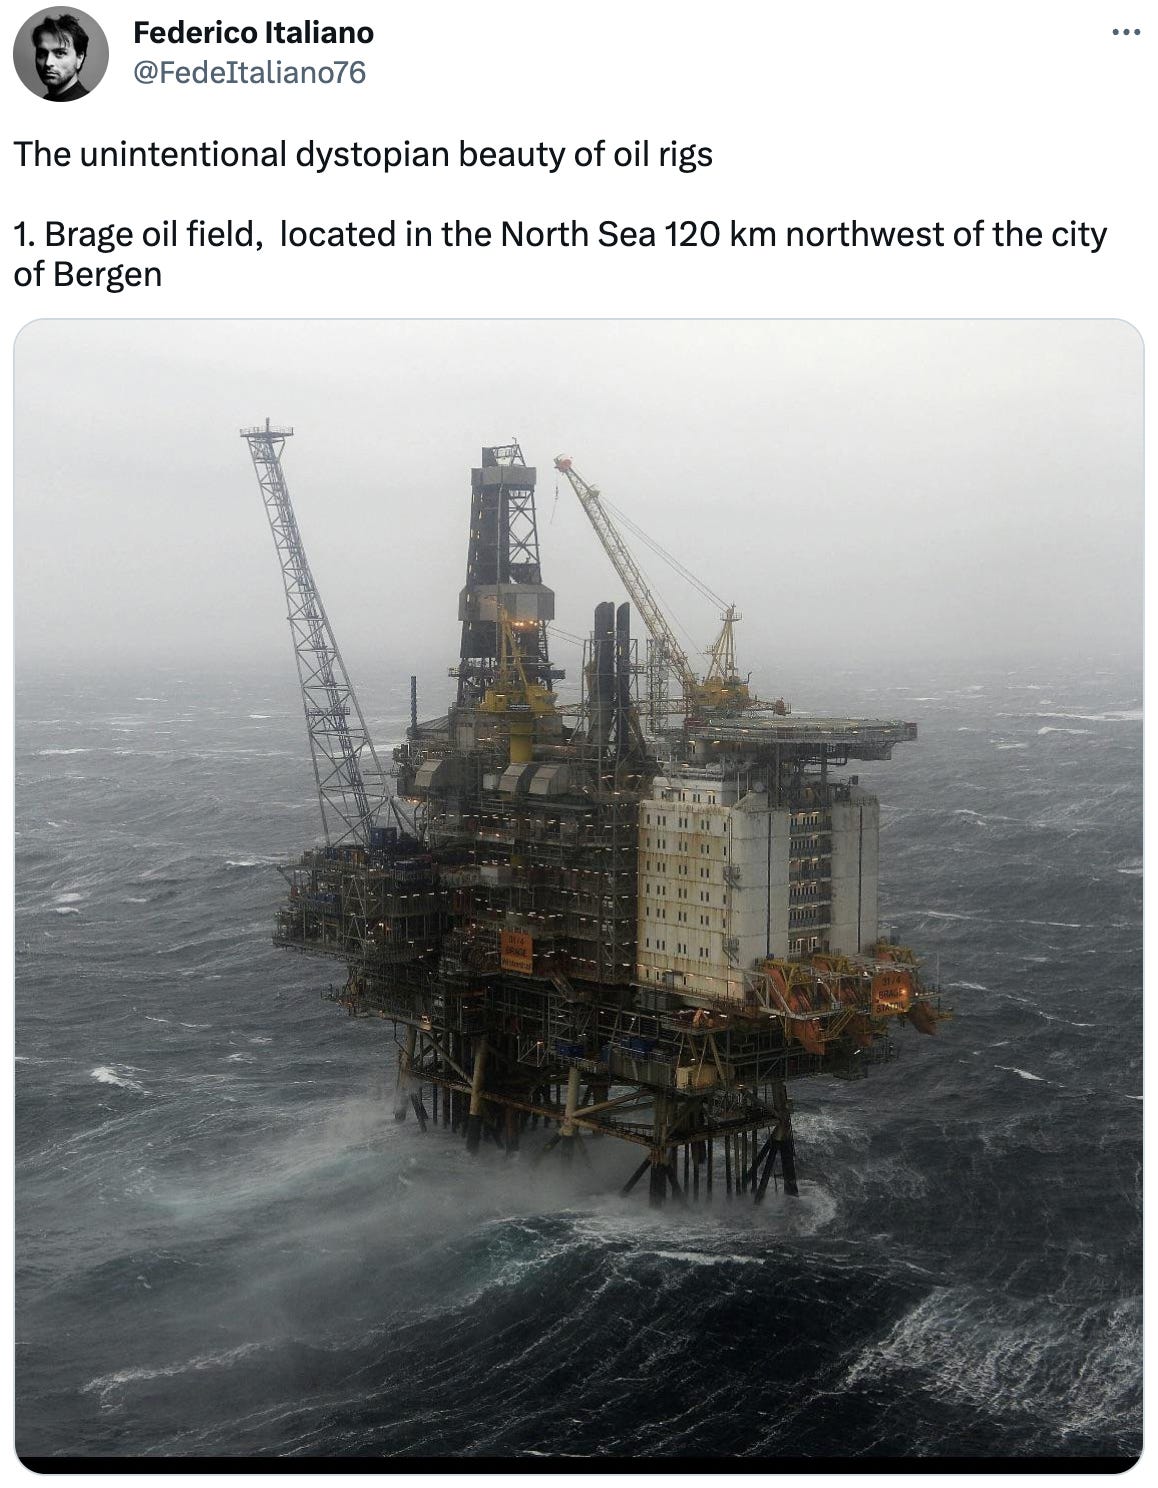  See new Tweets Conversation Federico Italiano @FedeItaliano76 The unintentional dystopian beauty of oil rigs  1. Brage oil field,  located in the North Sea 120 km northwest of the city of Bergen